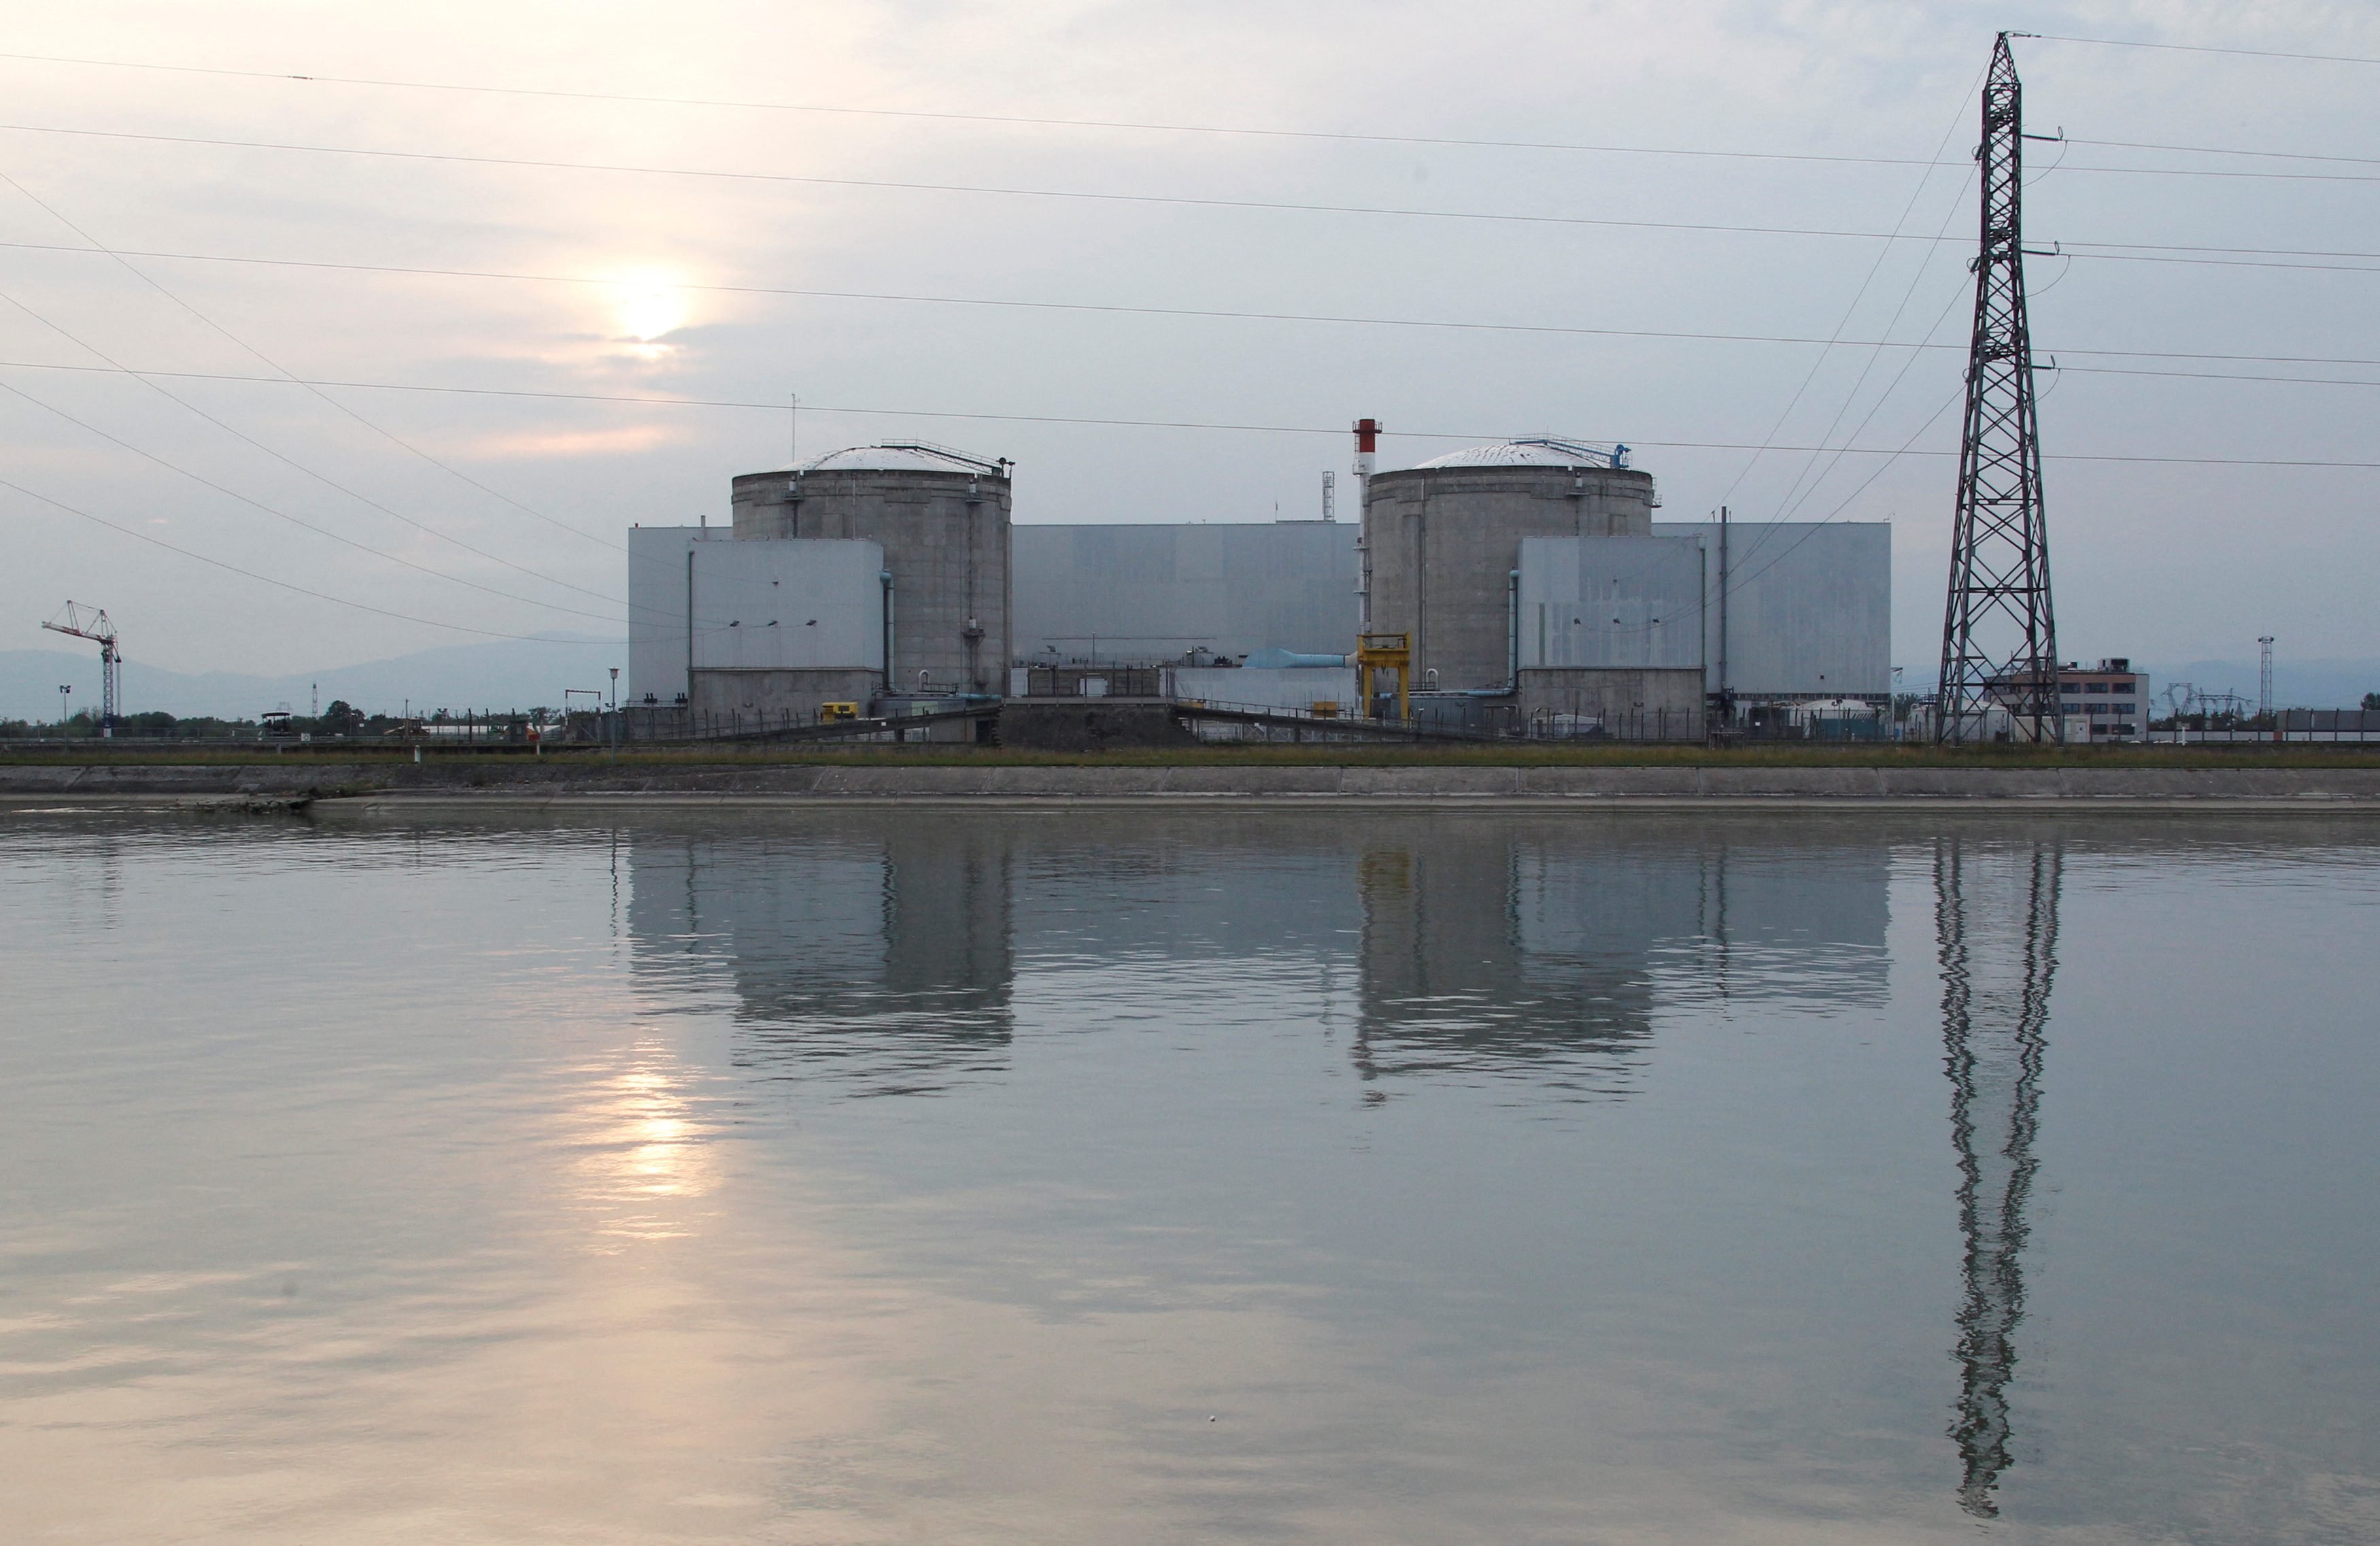 A general view shows France's oldest nuclear power station in Fessenheim